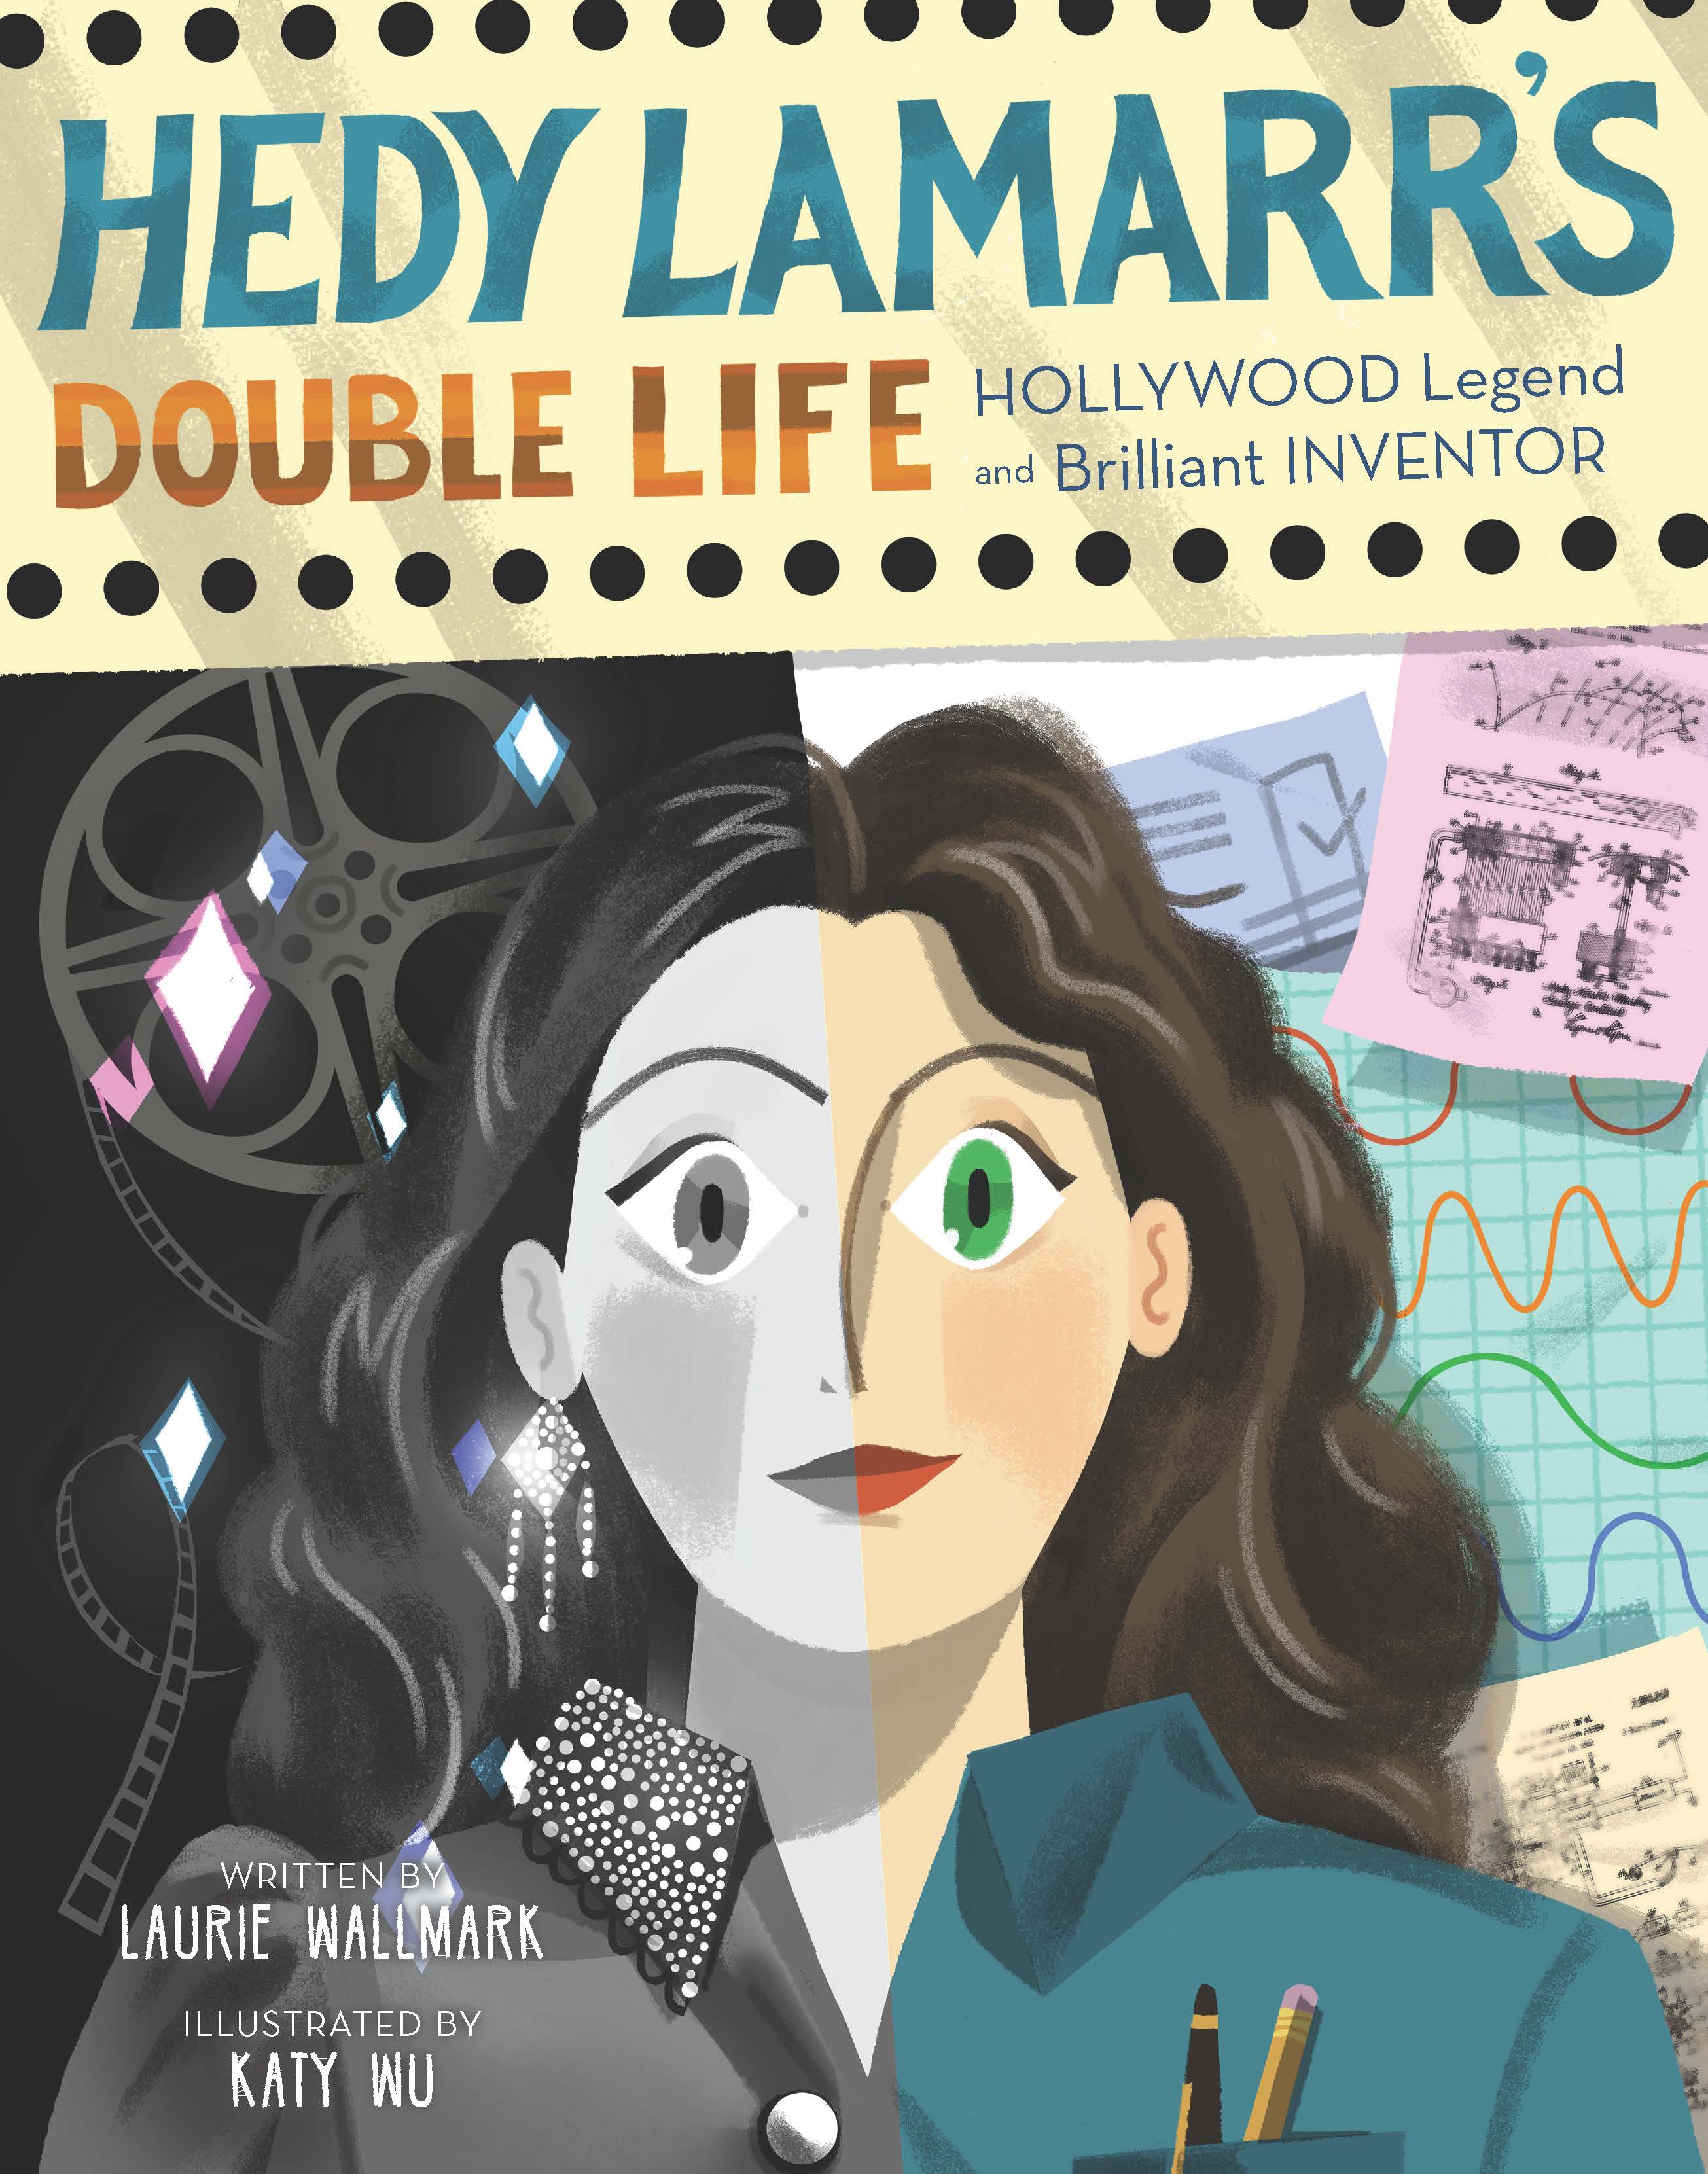 Hedy Lamarr's Double Life Hollywood Legend and Brilliant Inventor cover image